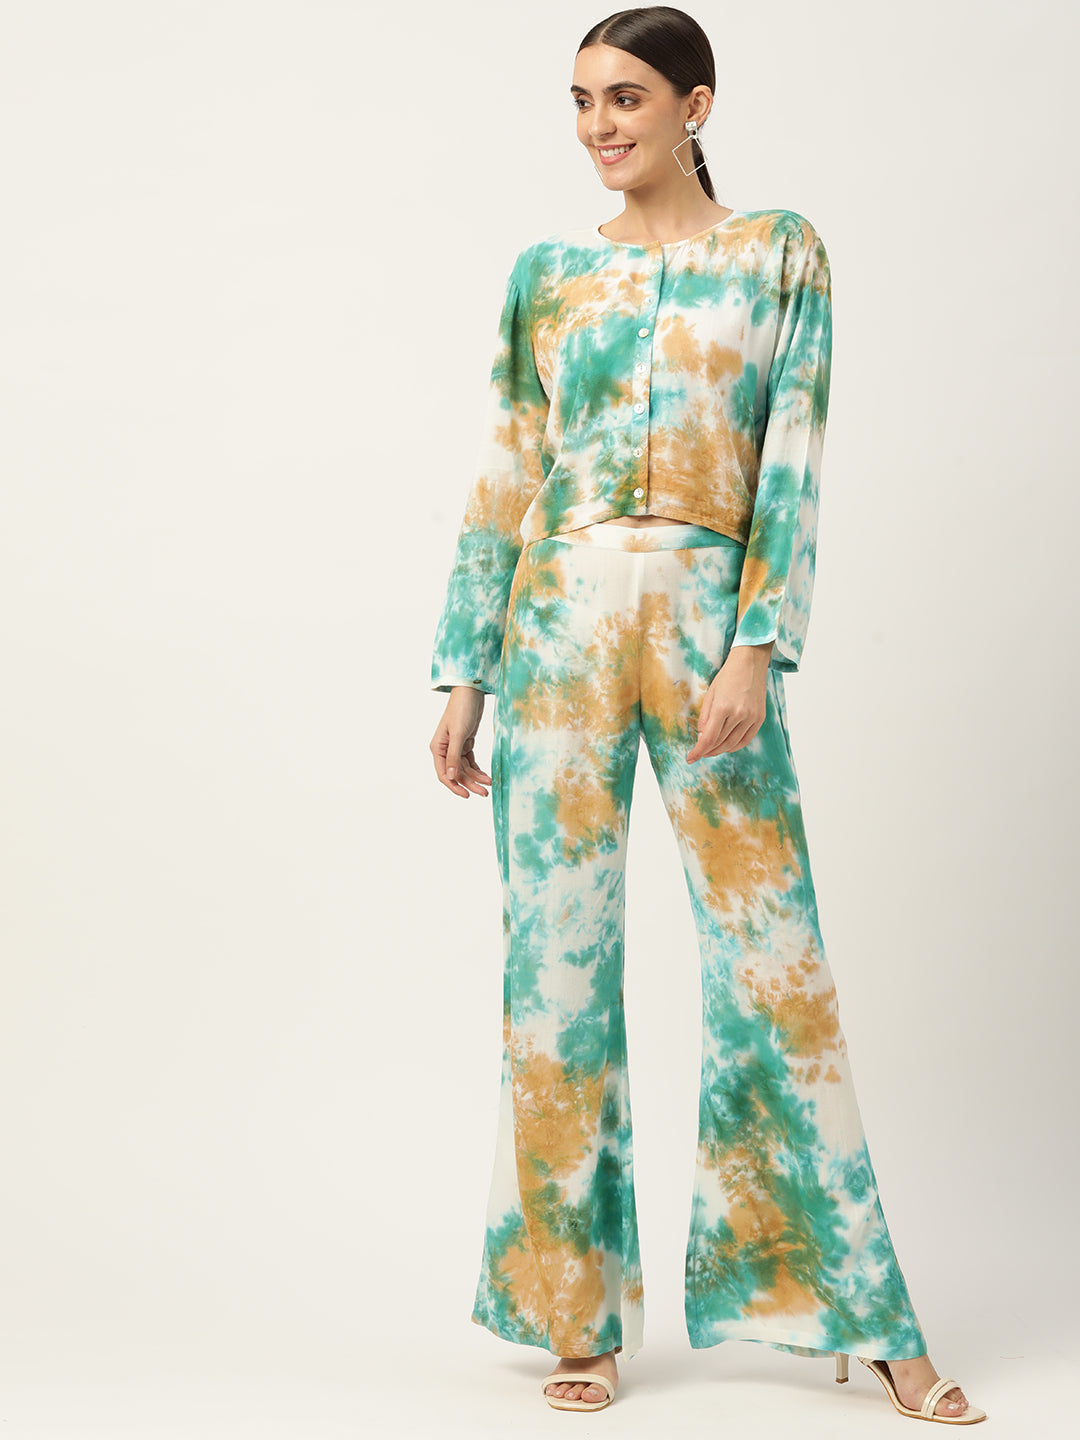 Green & Beige Rayon Tie & Dyed Co-Ords Set for women 